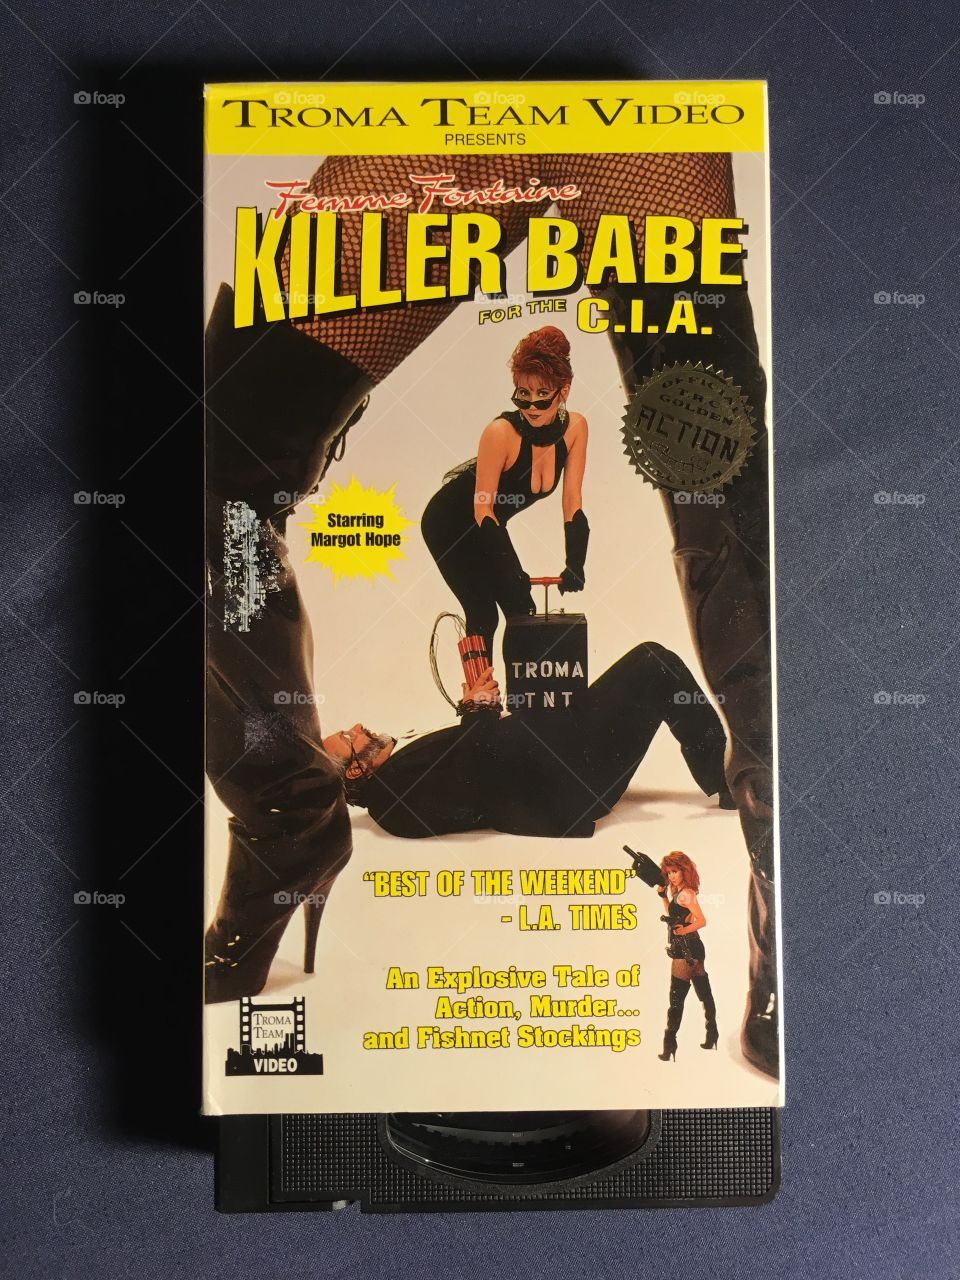 Killer babe for the CIA VHS Movie 